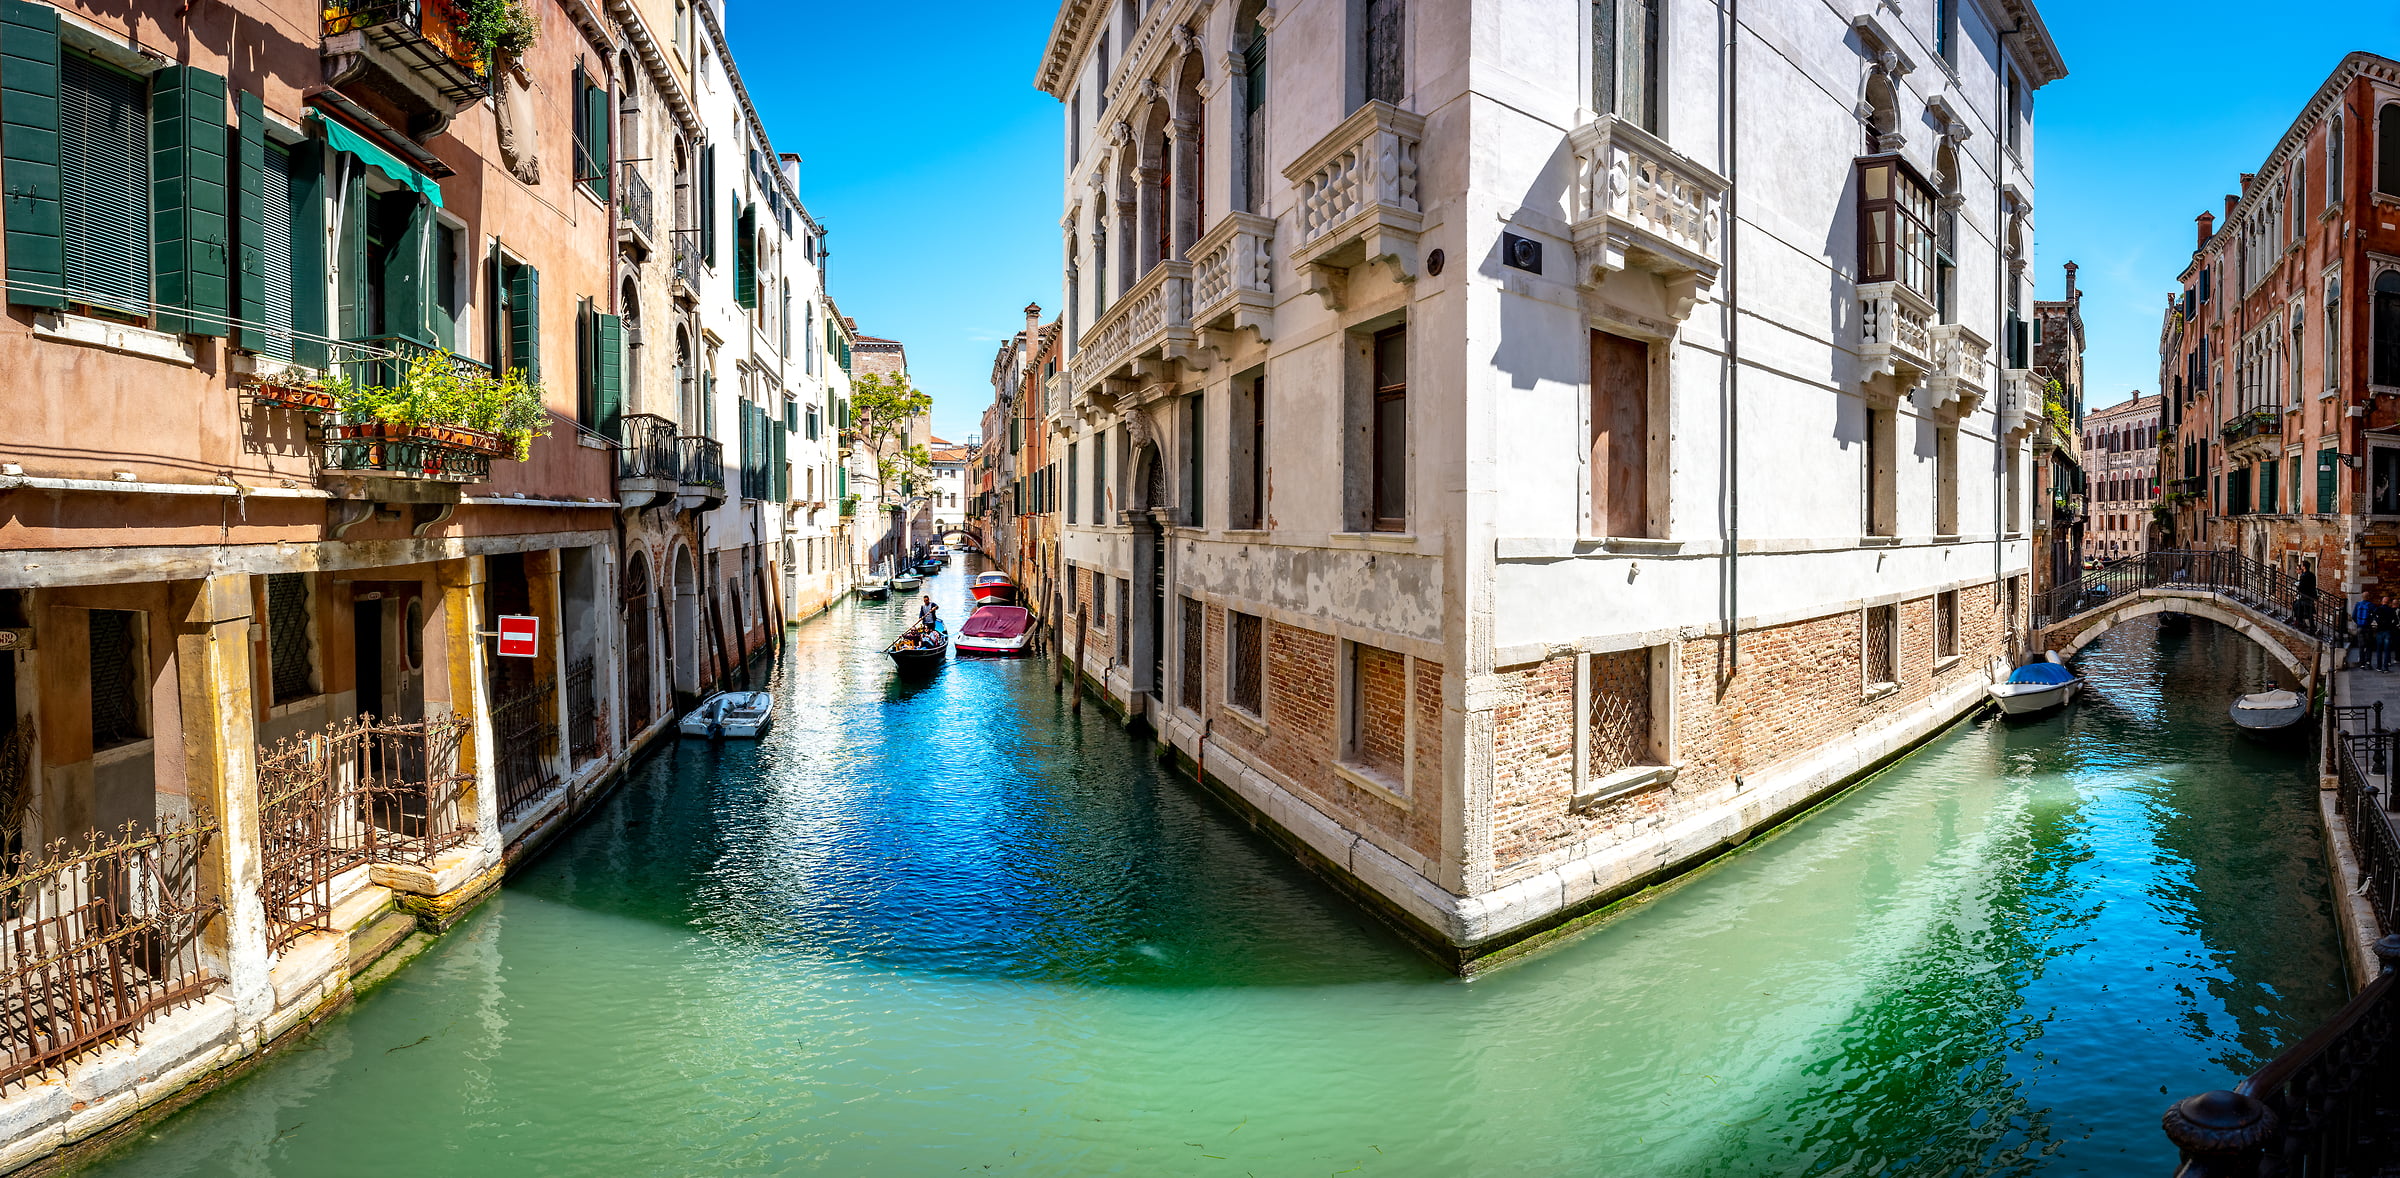 102 megapixels! A very high resolution, large-format VAST photo print of the Venice canals; photograph created by Justin Katz in Rio Della Telta, Venice, Italy